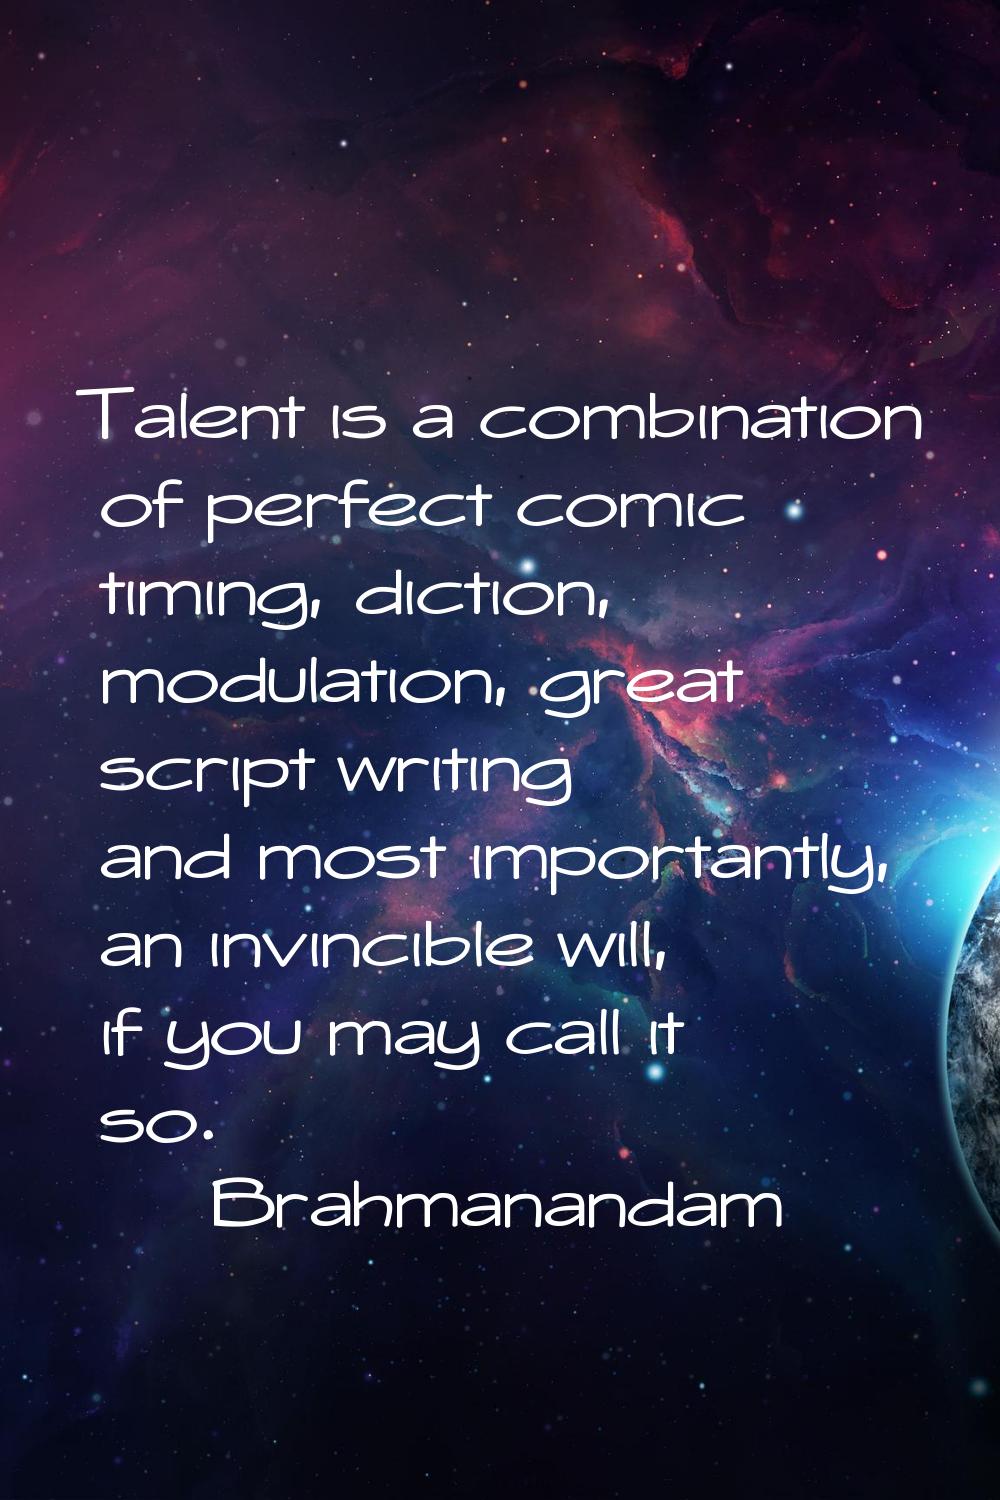 Talent is a combination of perfect comic timing, diction, modulation, great script writing and most